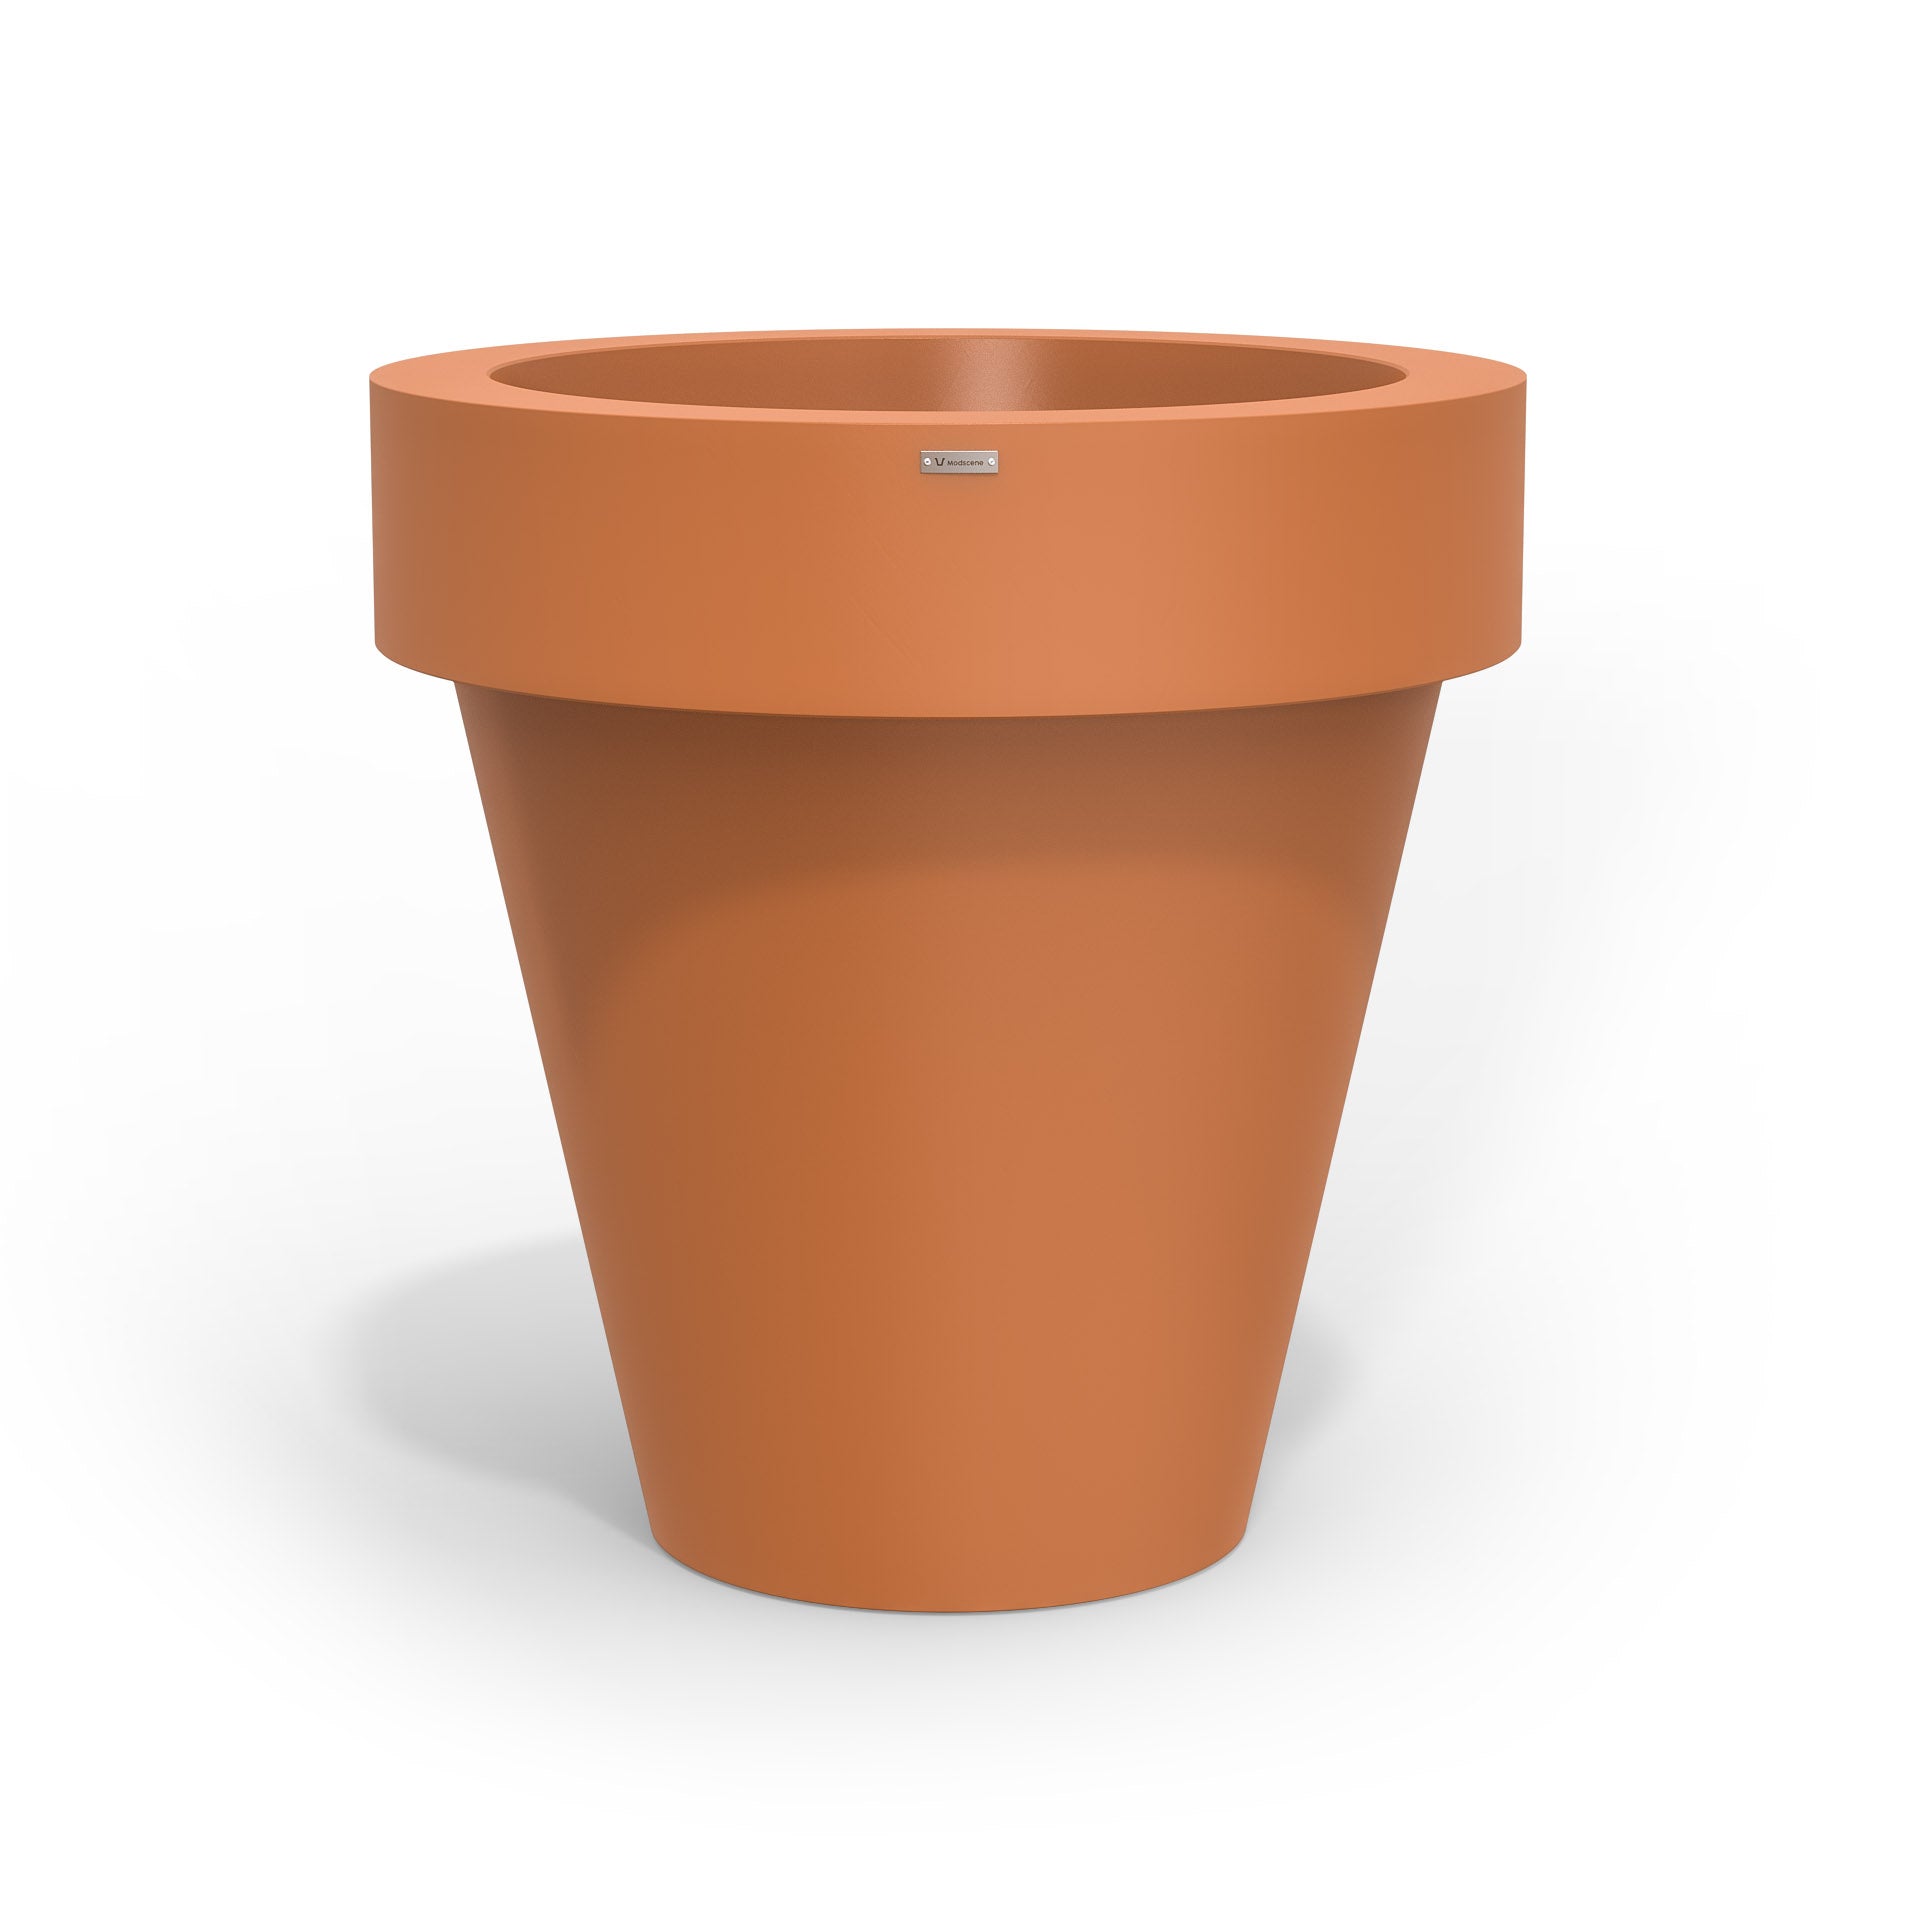 Extra large Modscene planter pot in a terracotta colour. NZ made.